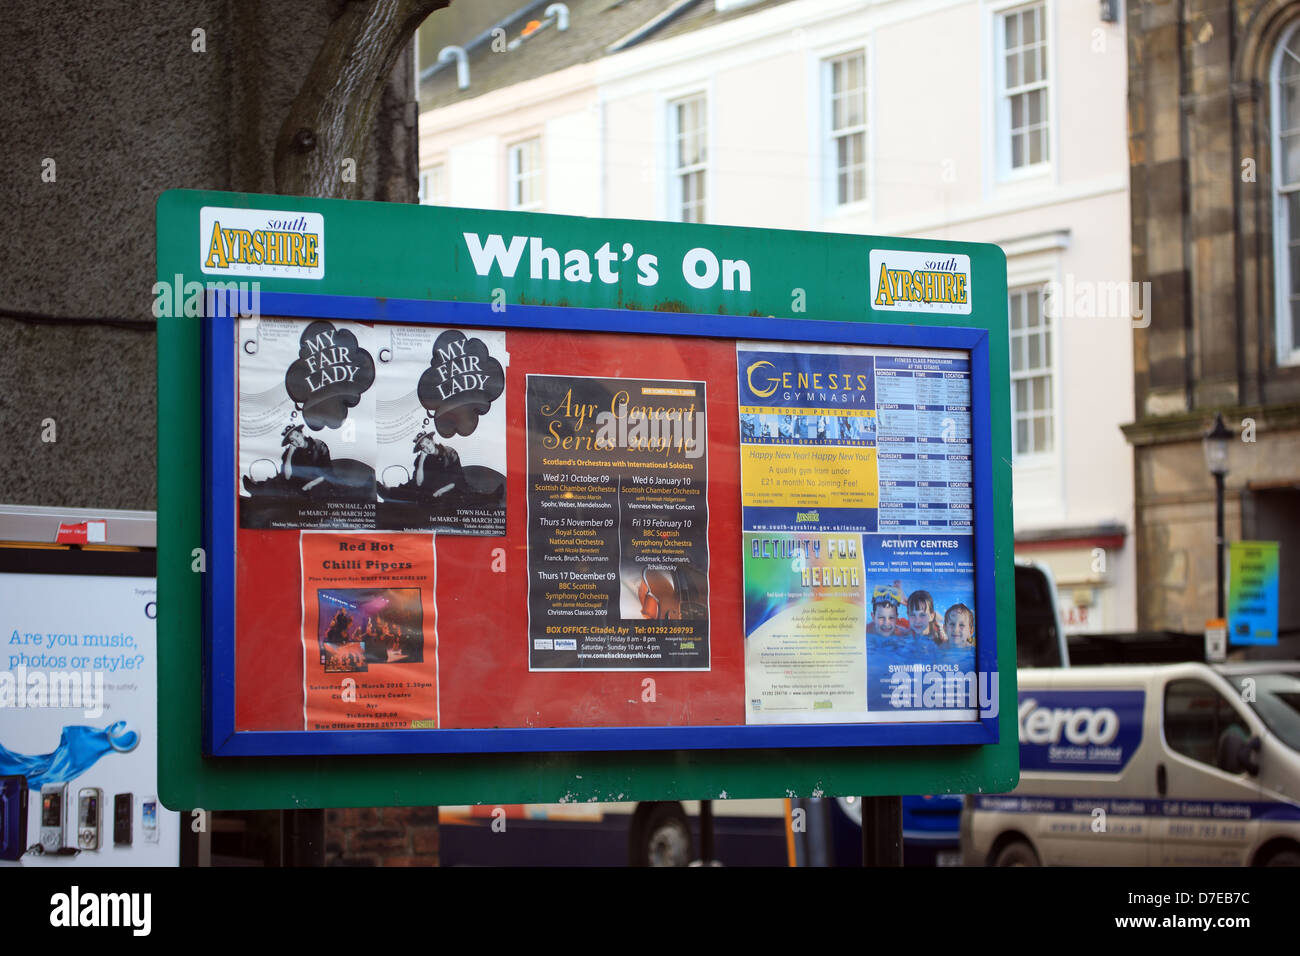 What's on information board in the Ayrshire town of Ayr Stock Photo